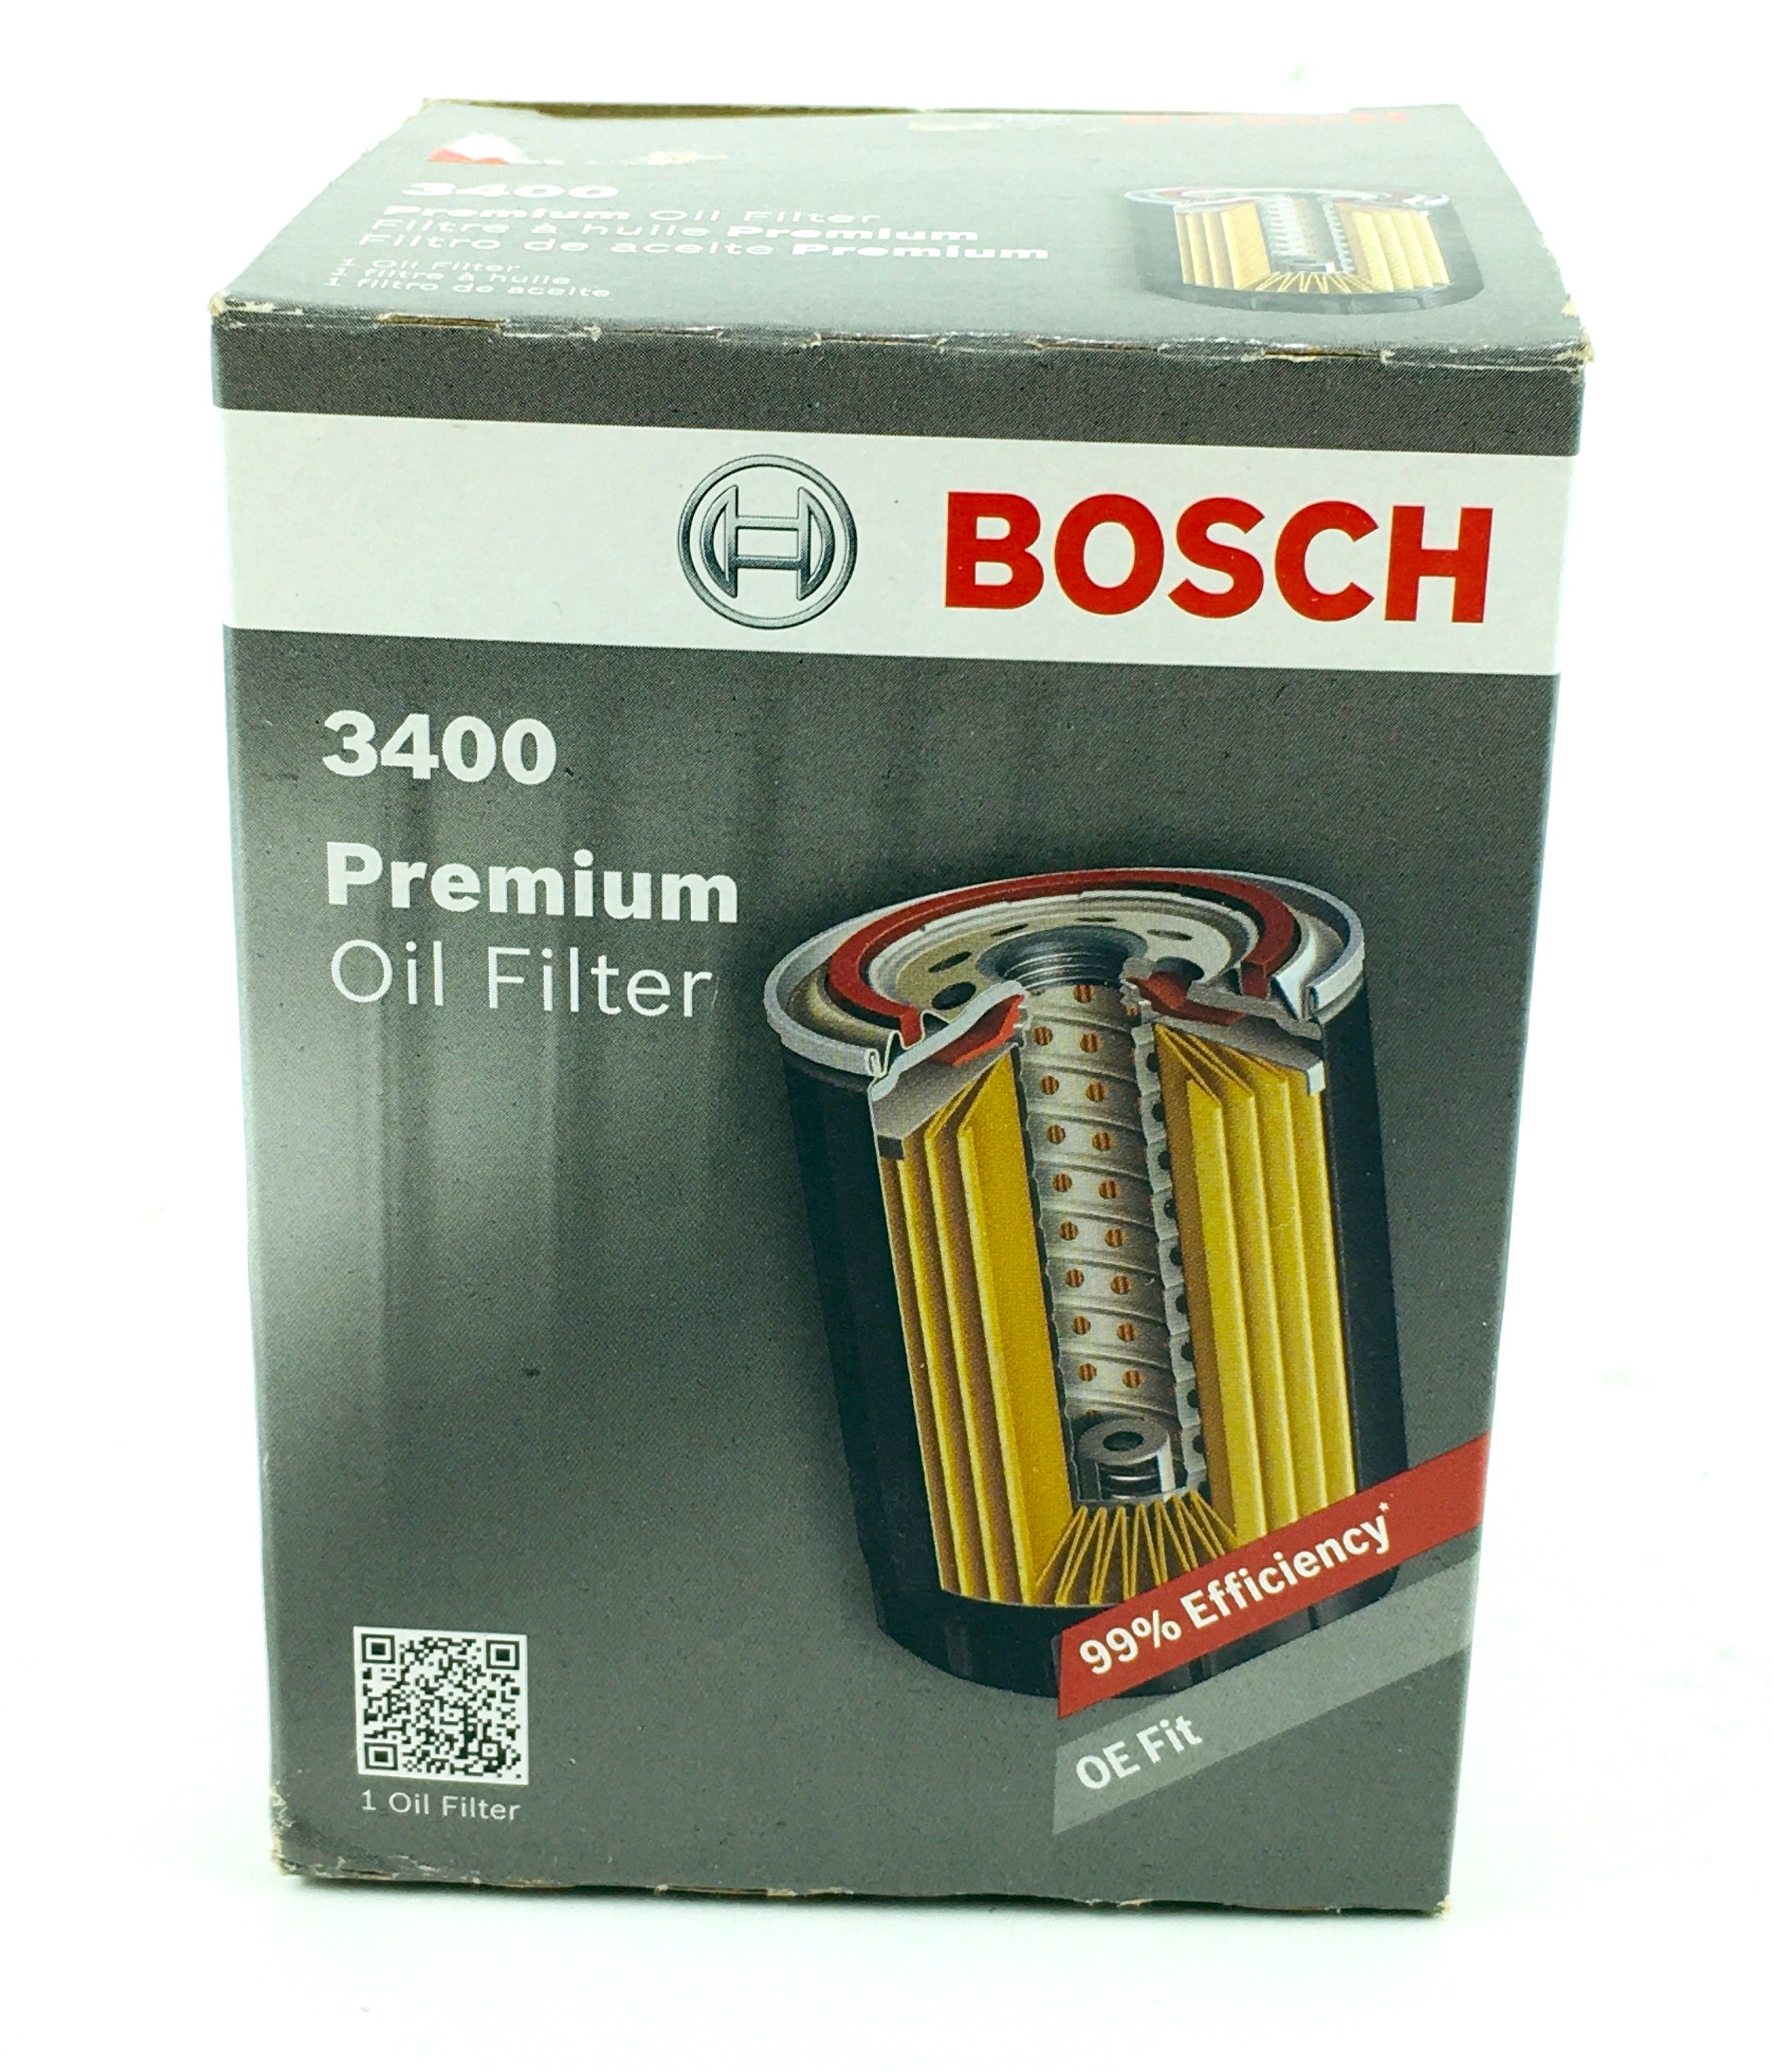 Lot of 6 New Genuine Bosch 3400 Premium Spin-On Engine Oil Filters Free Shipping - image 5